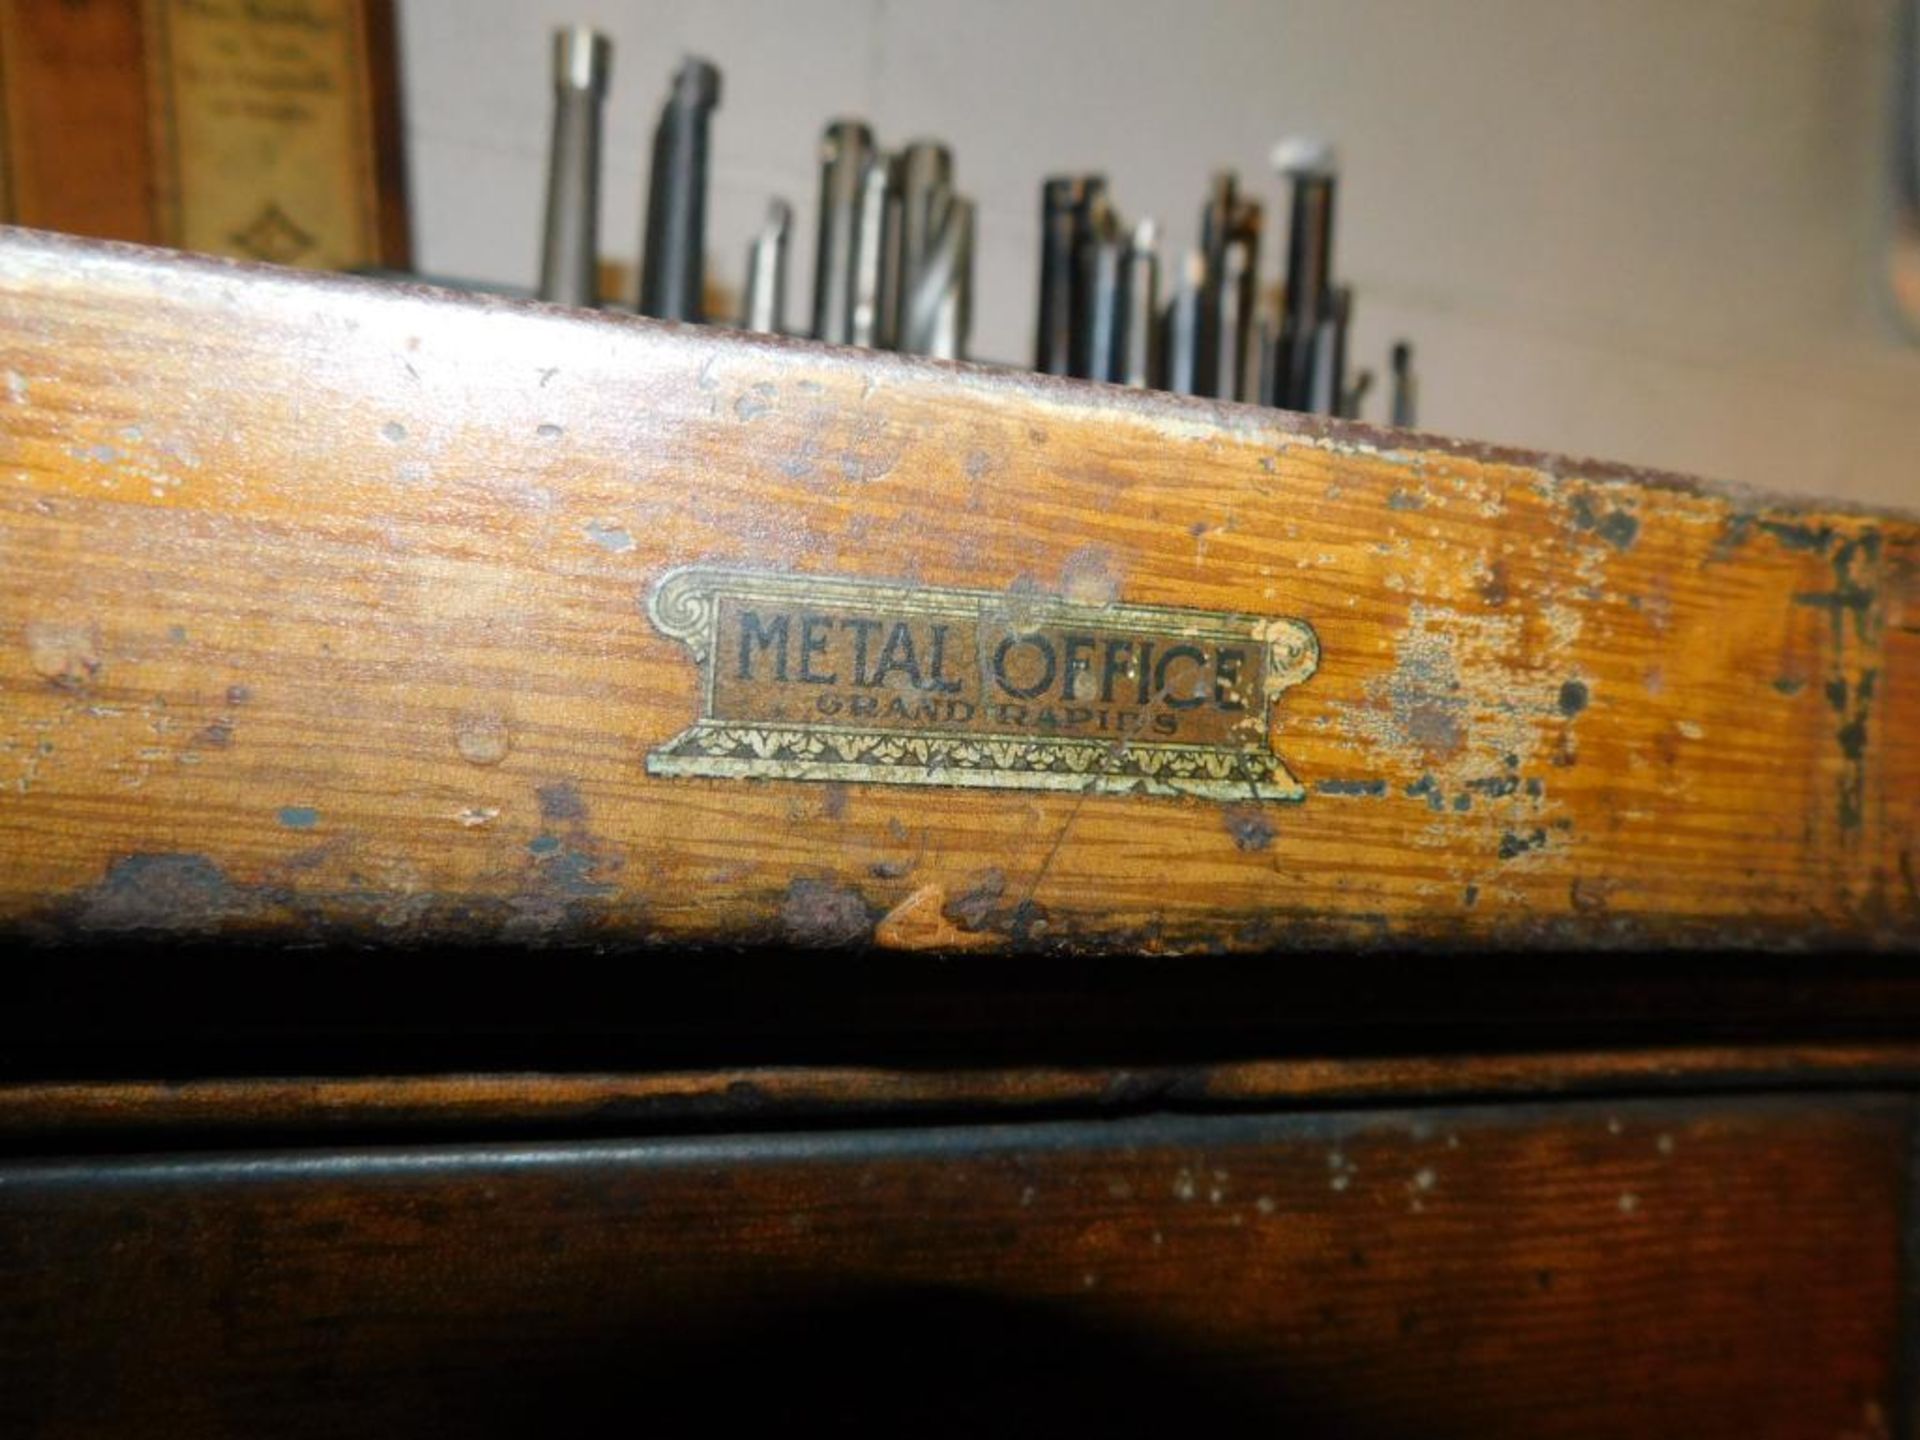 Metal Office Vintage Wood 16-Drawer Cabinet on Steel Castors w/Contents (NO CONTENTS ON TOP) - Image 13 of 13